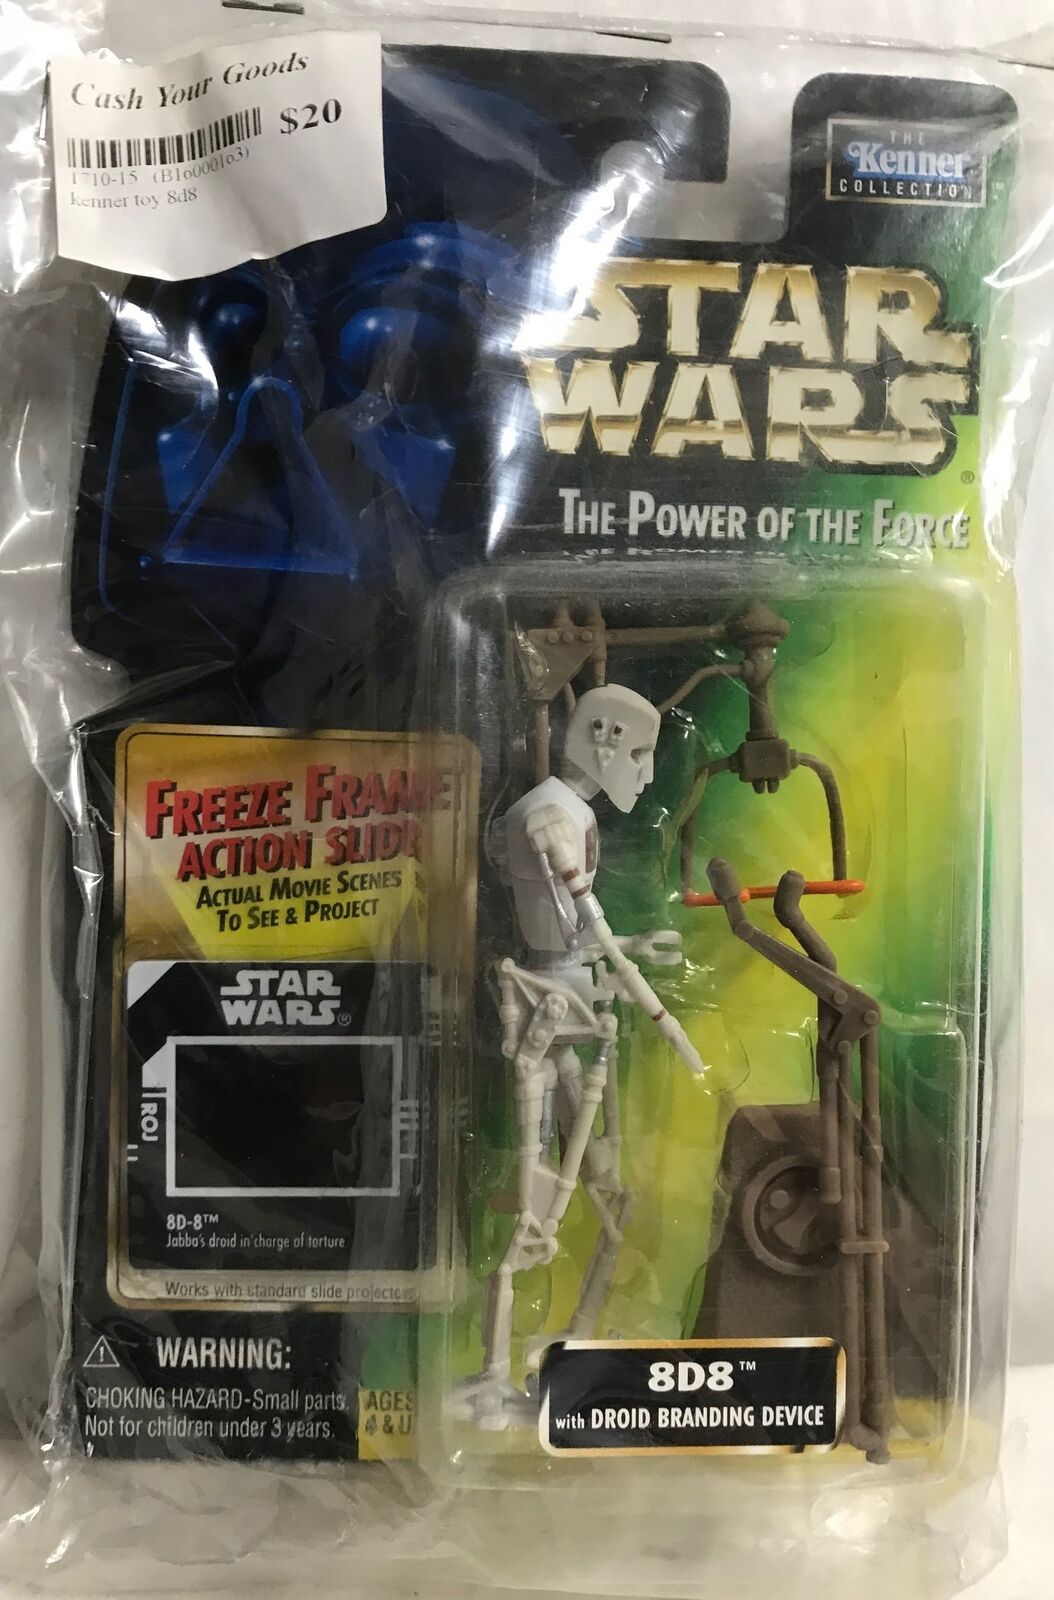 STAR WARS - KENNER - POTF - 8D8 - with Droid Branding Device